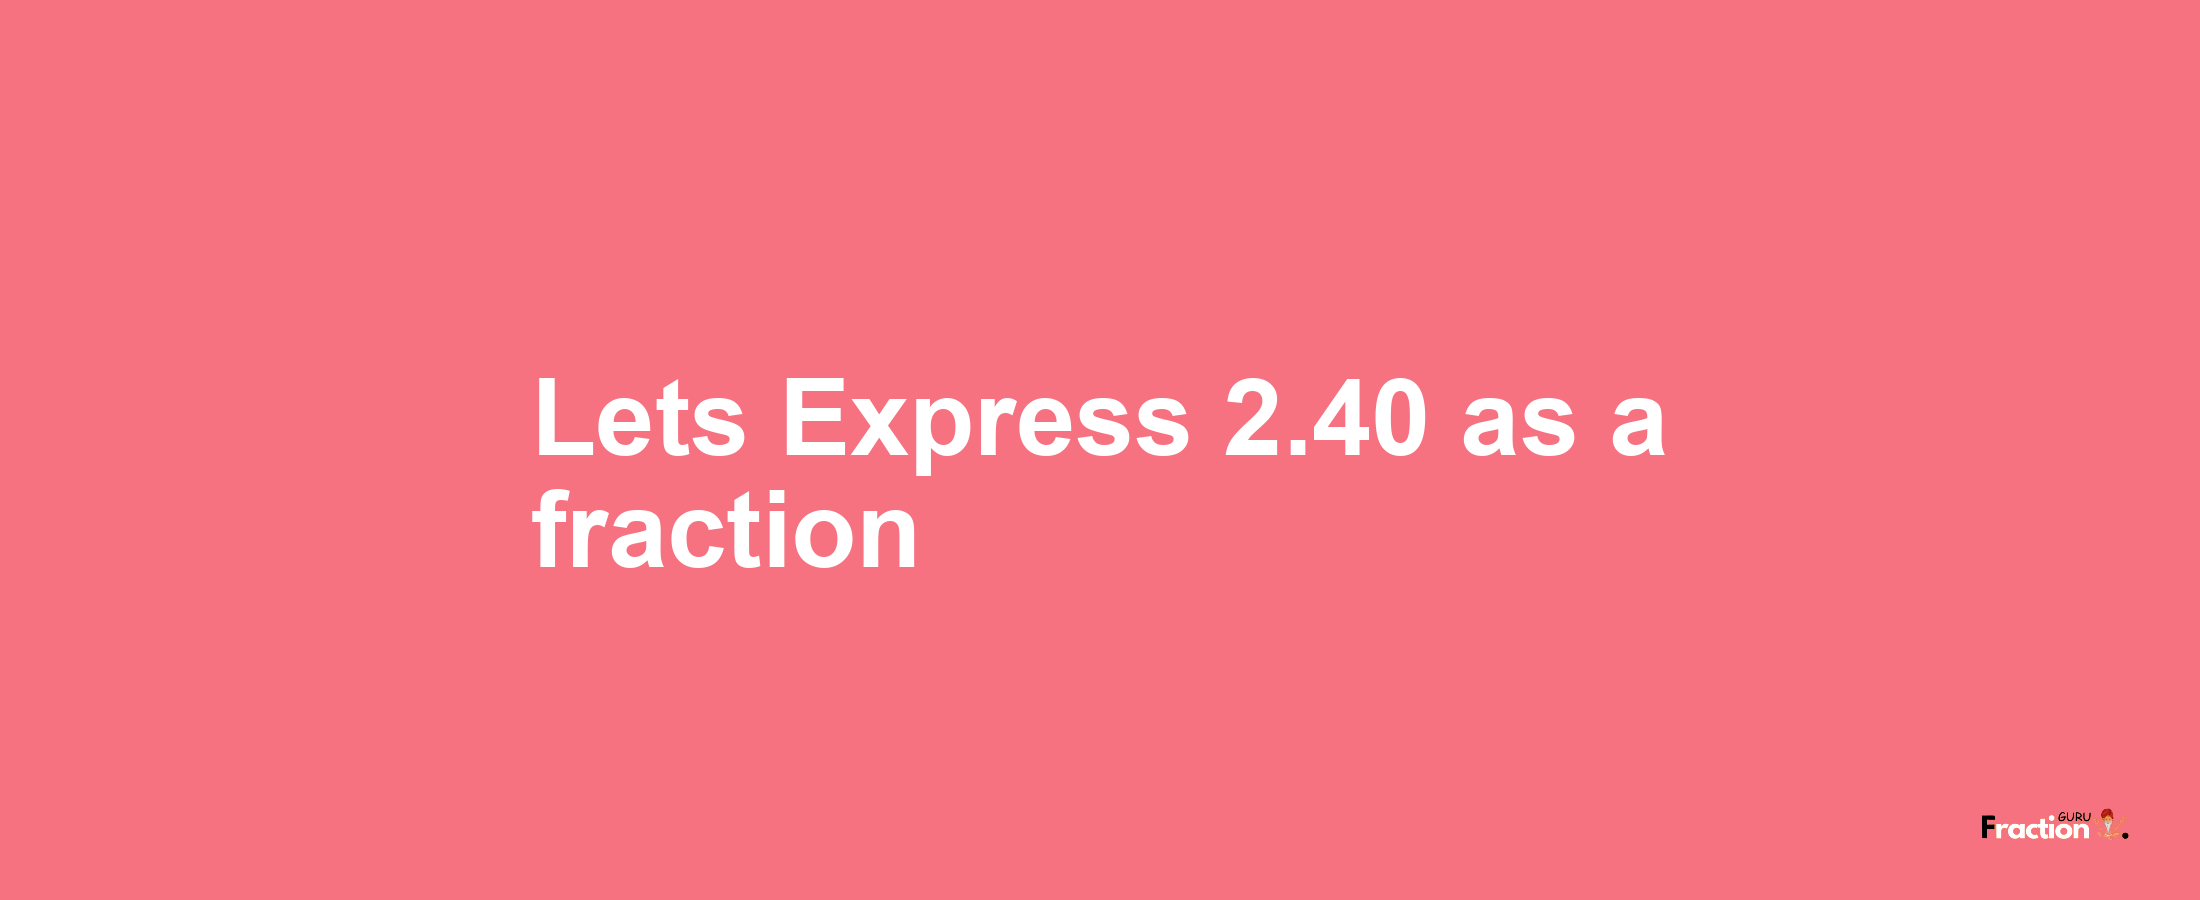 Lets Express 2.40 as afraction